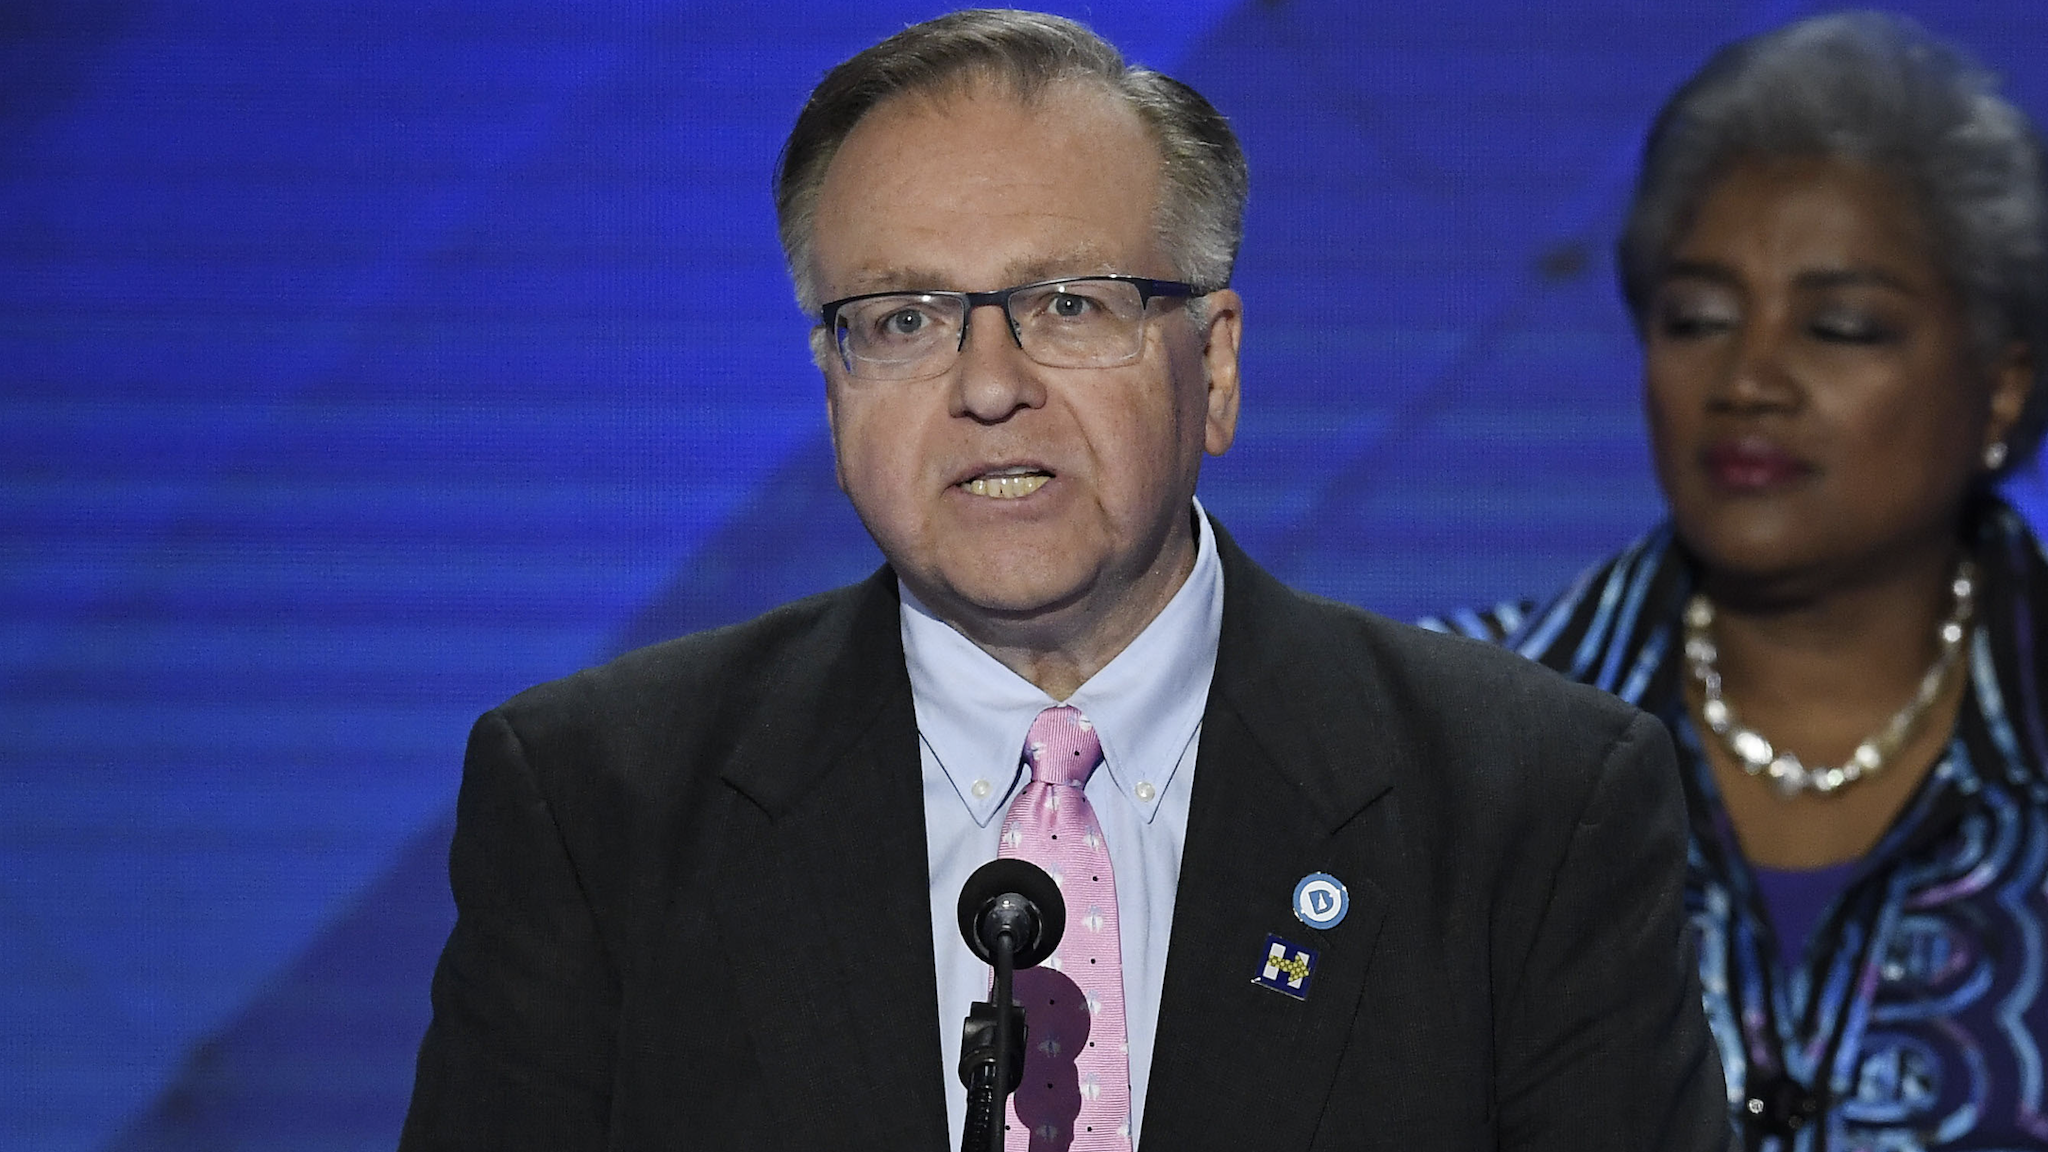 Raymond Buckley, vice chair of the Democratic National Committee, speaks during the Democratic National Convention (DNC) in Philadelphia, Pennsylvania, U.S., on Thursday, July 28, 2016. Division among Democrats has been overcome through speeches from two presidents, another first lady and a vice-president, who raised the stakes for their candidate by warning that her opponent posed an unprecedented threat to American diplomacy.